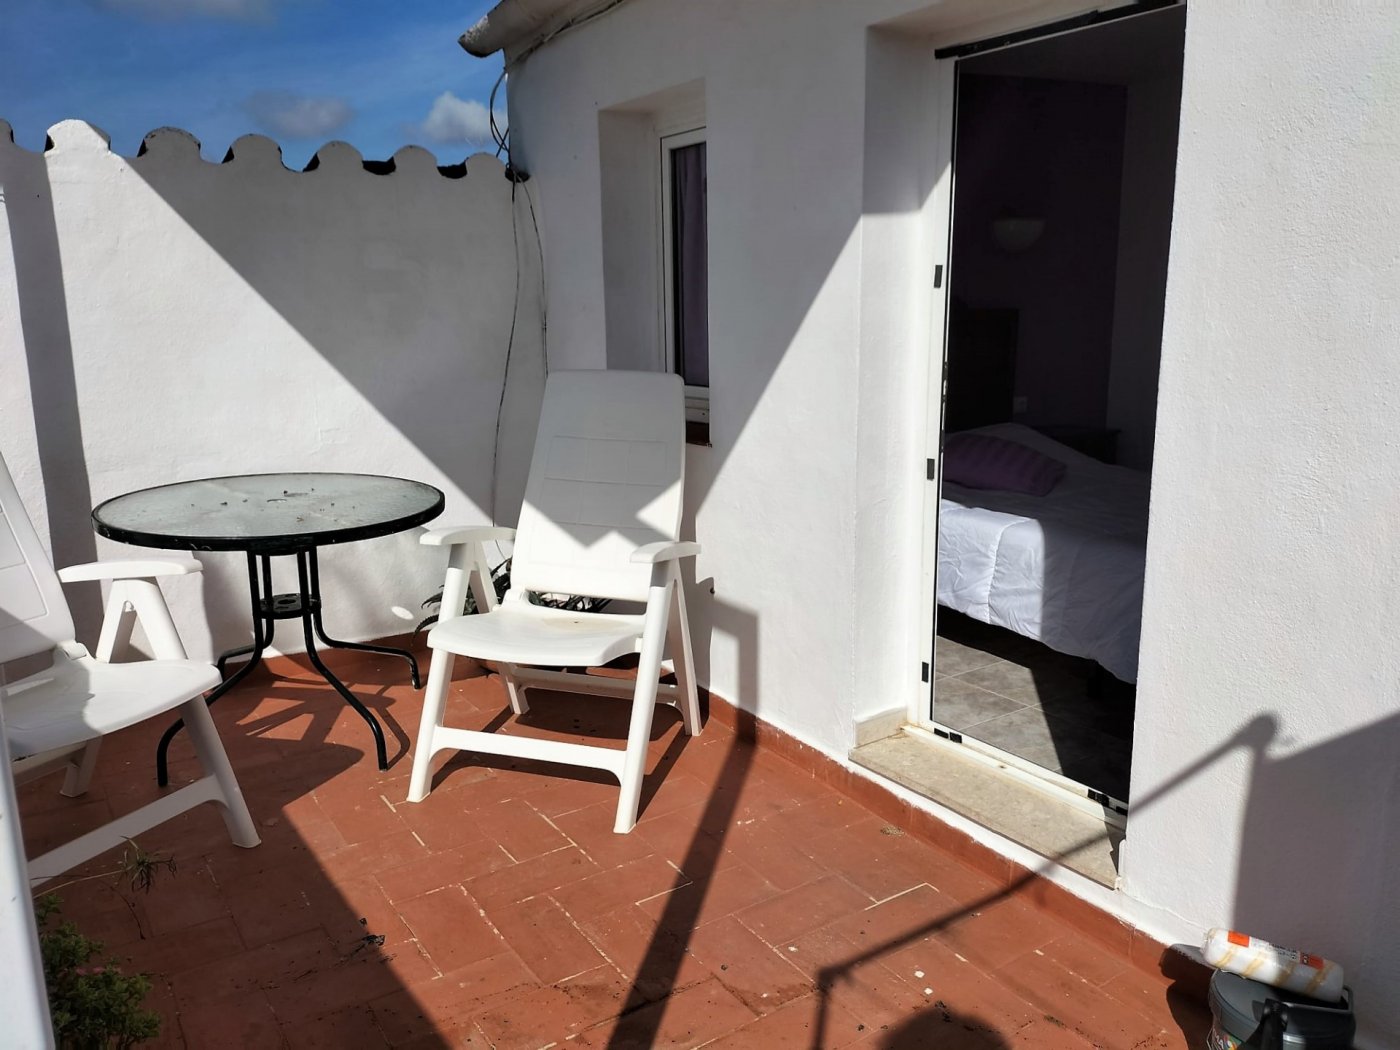 Apartment for sale in Menorca East 16